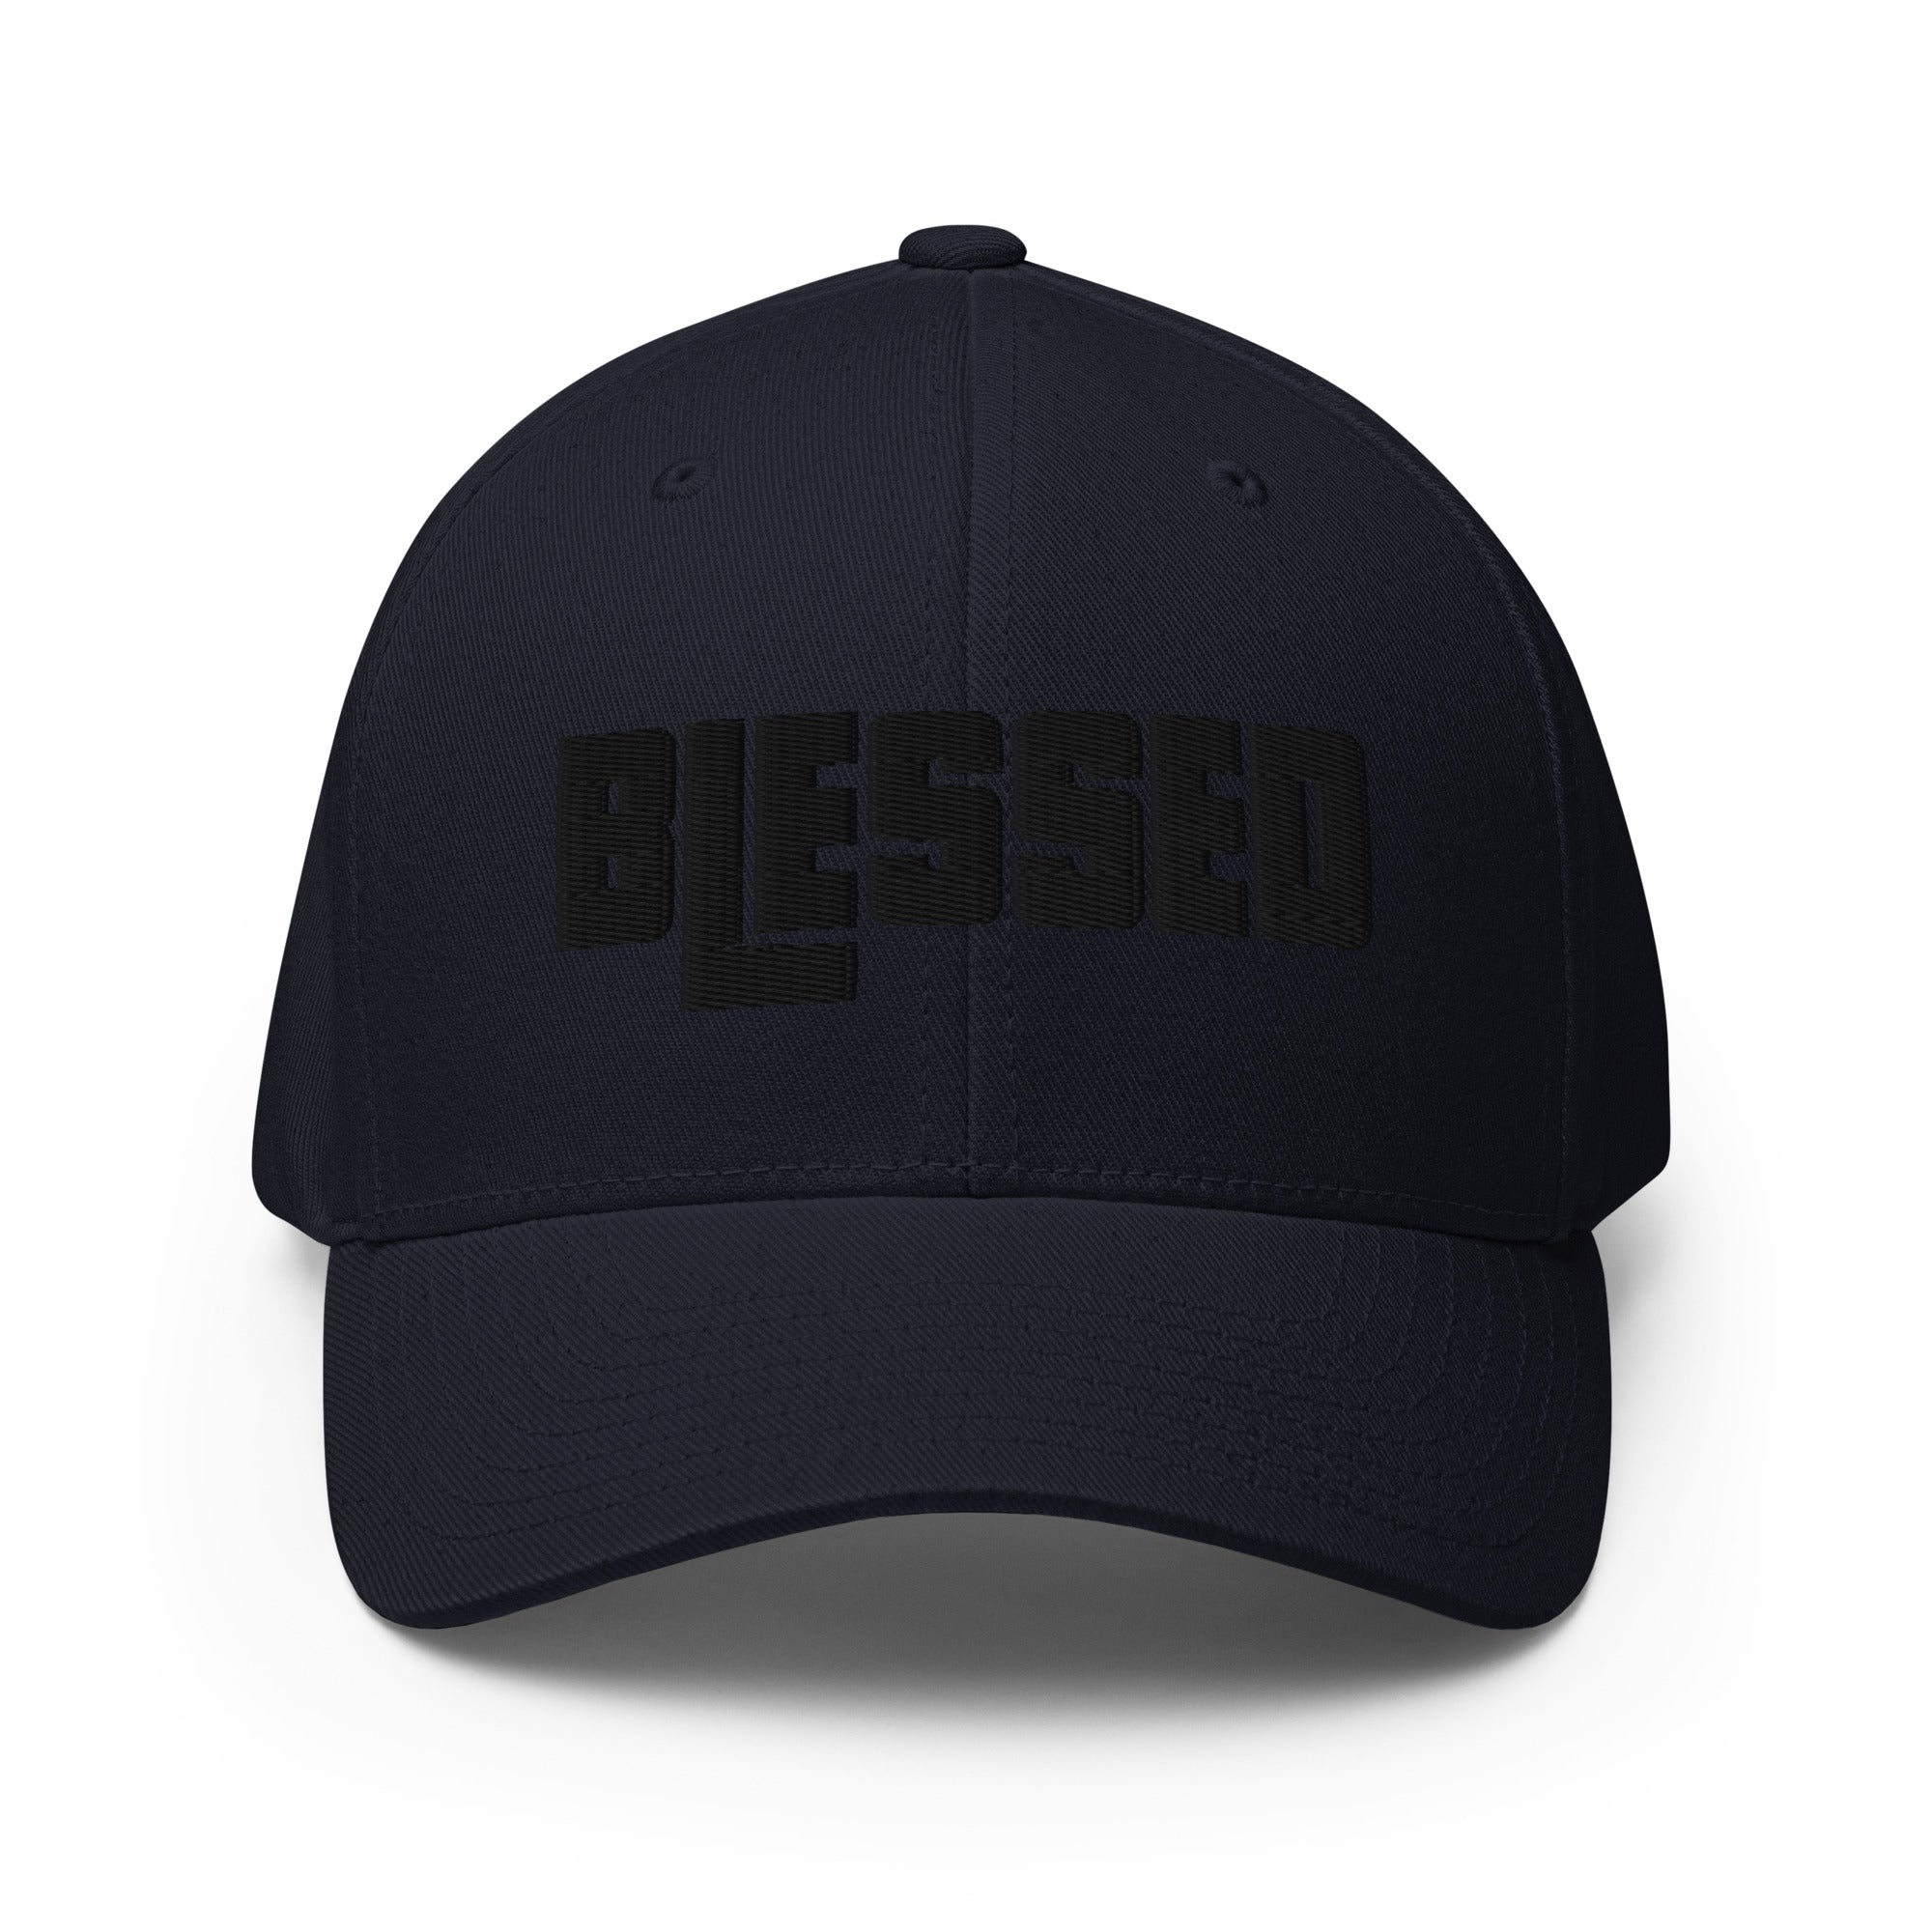 Blessed, Black 3d Puff Embroidered Flex Fitted Cap - Christian Hat